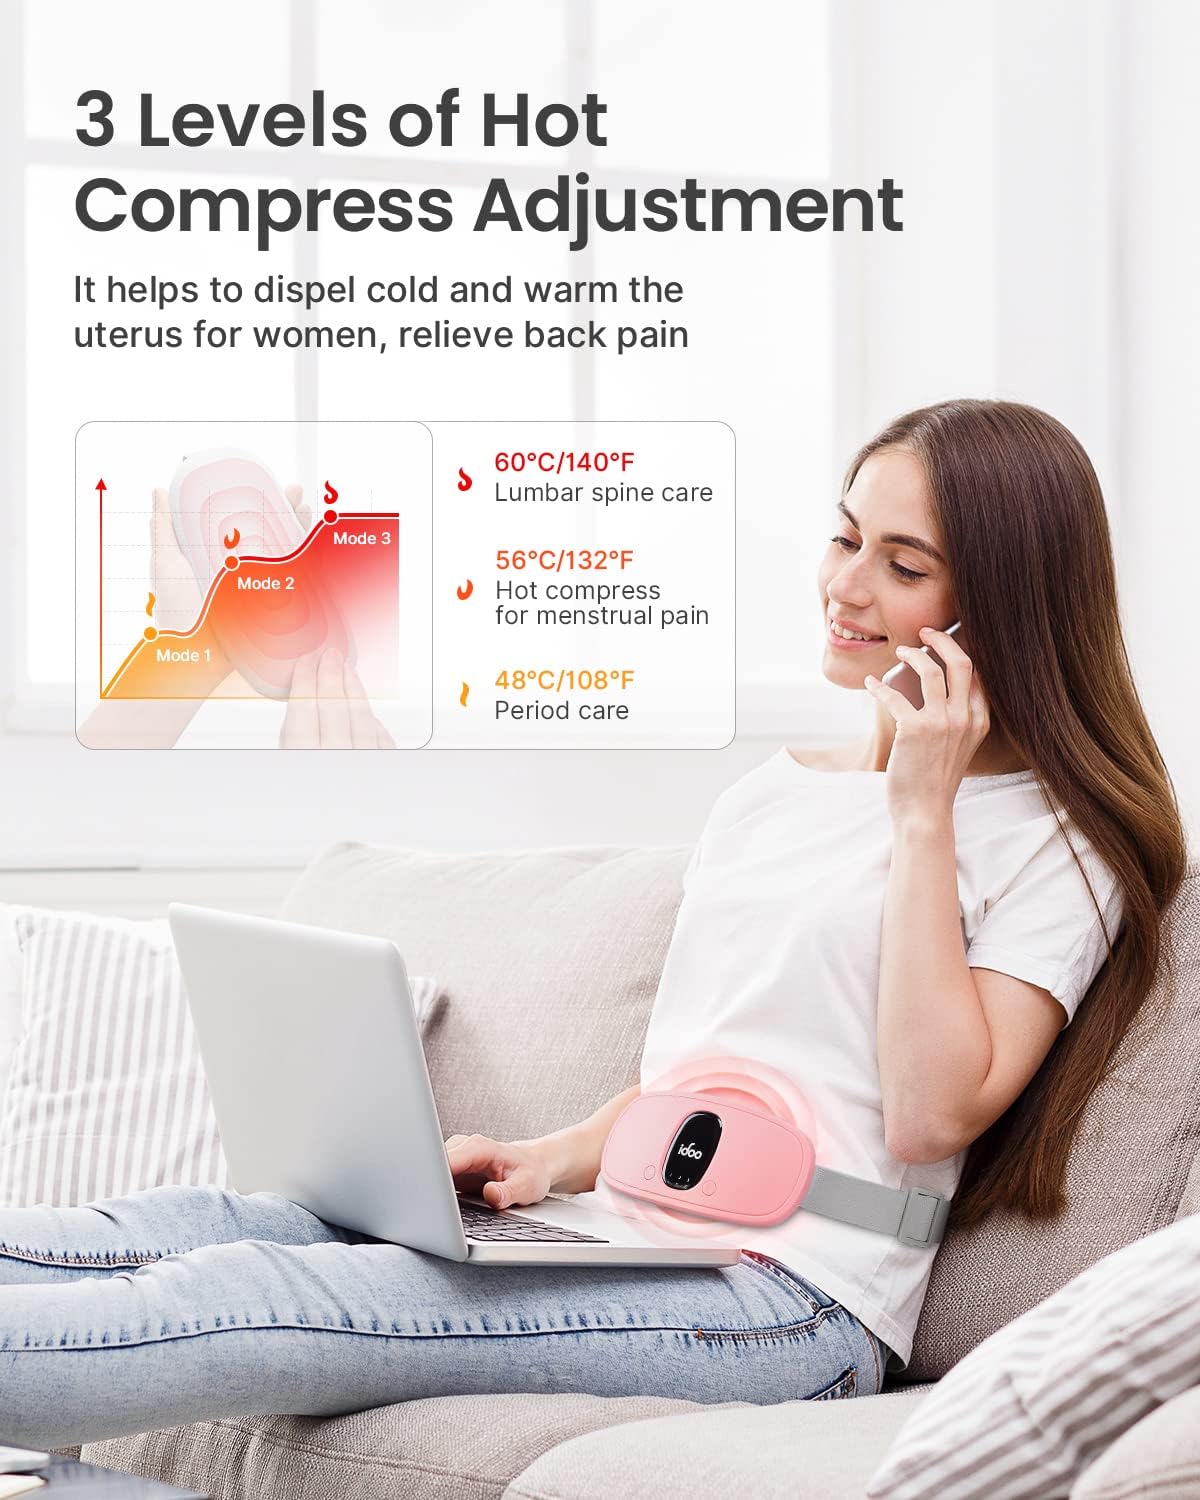 iDOO Portable Heating Pads for Cramps Pink - BFD AU cramps_AU cramps_CA heating pad by idoo